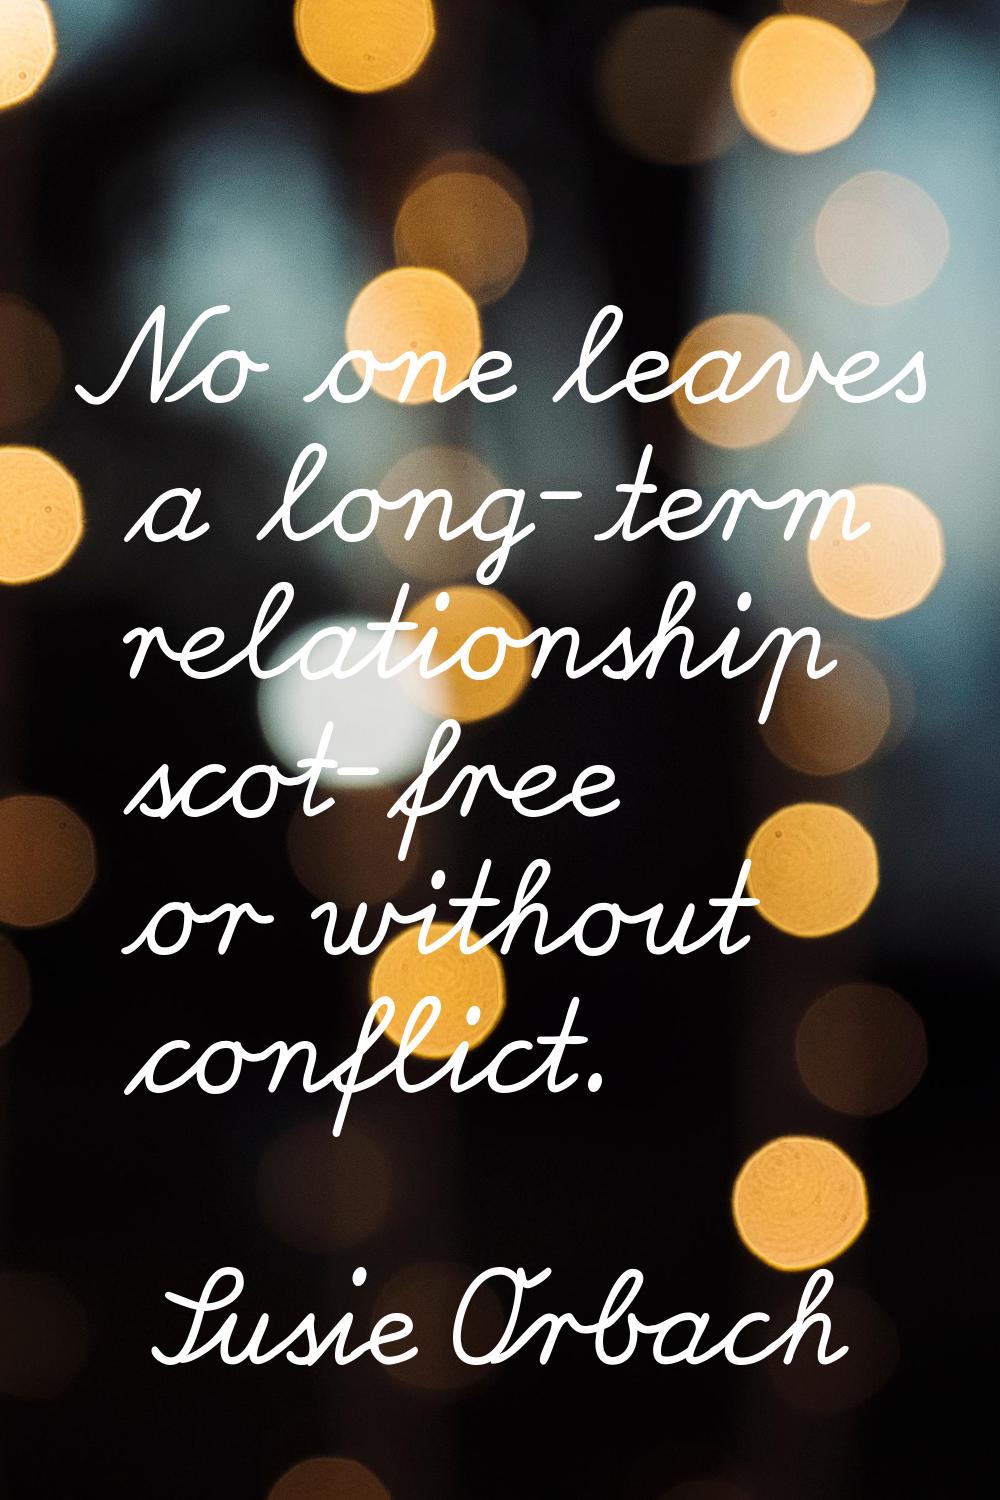 No one leaves a long-term relationship scot-free or without conflict.